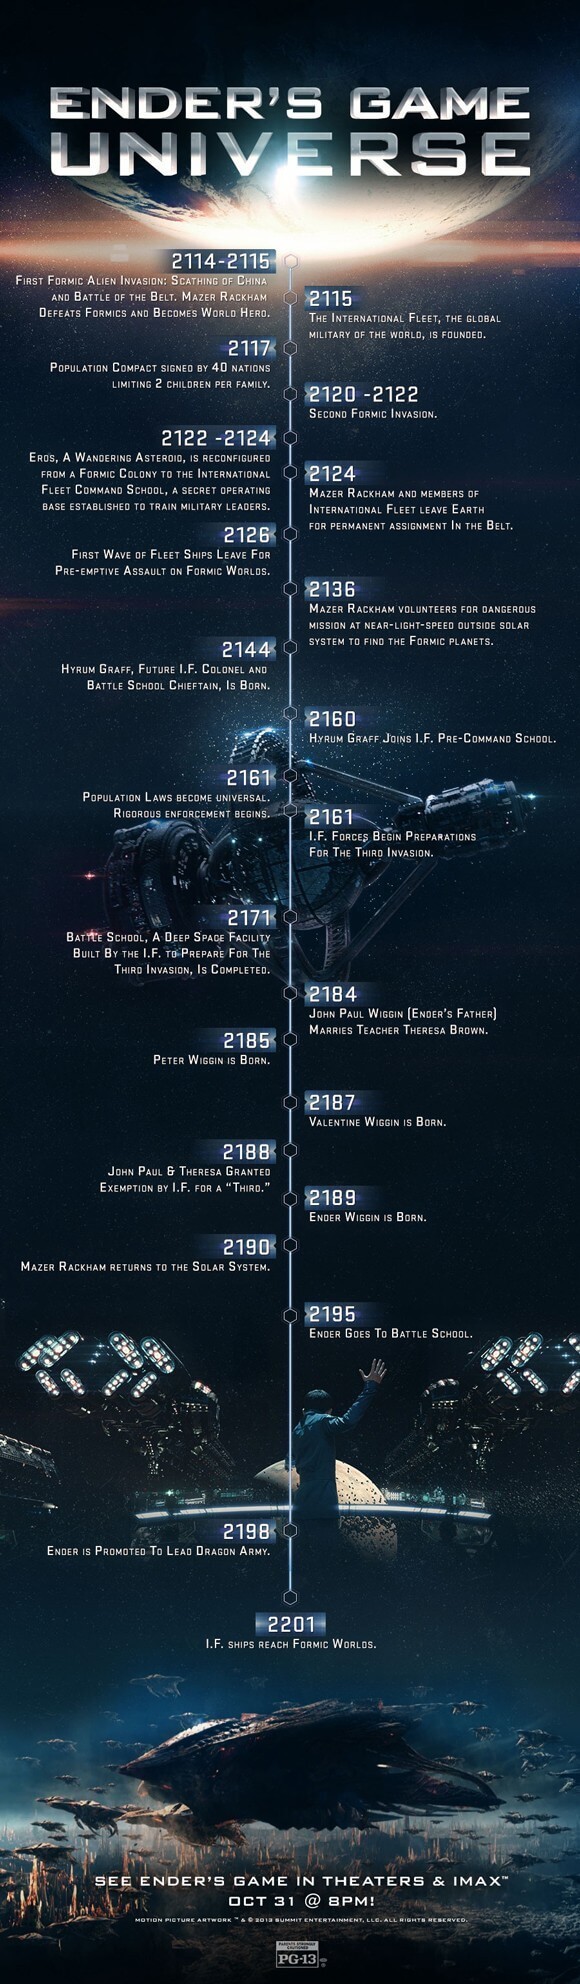 Ender's Game Infographic